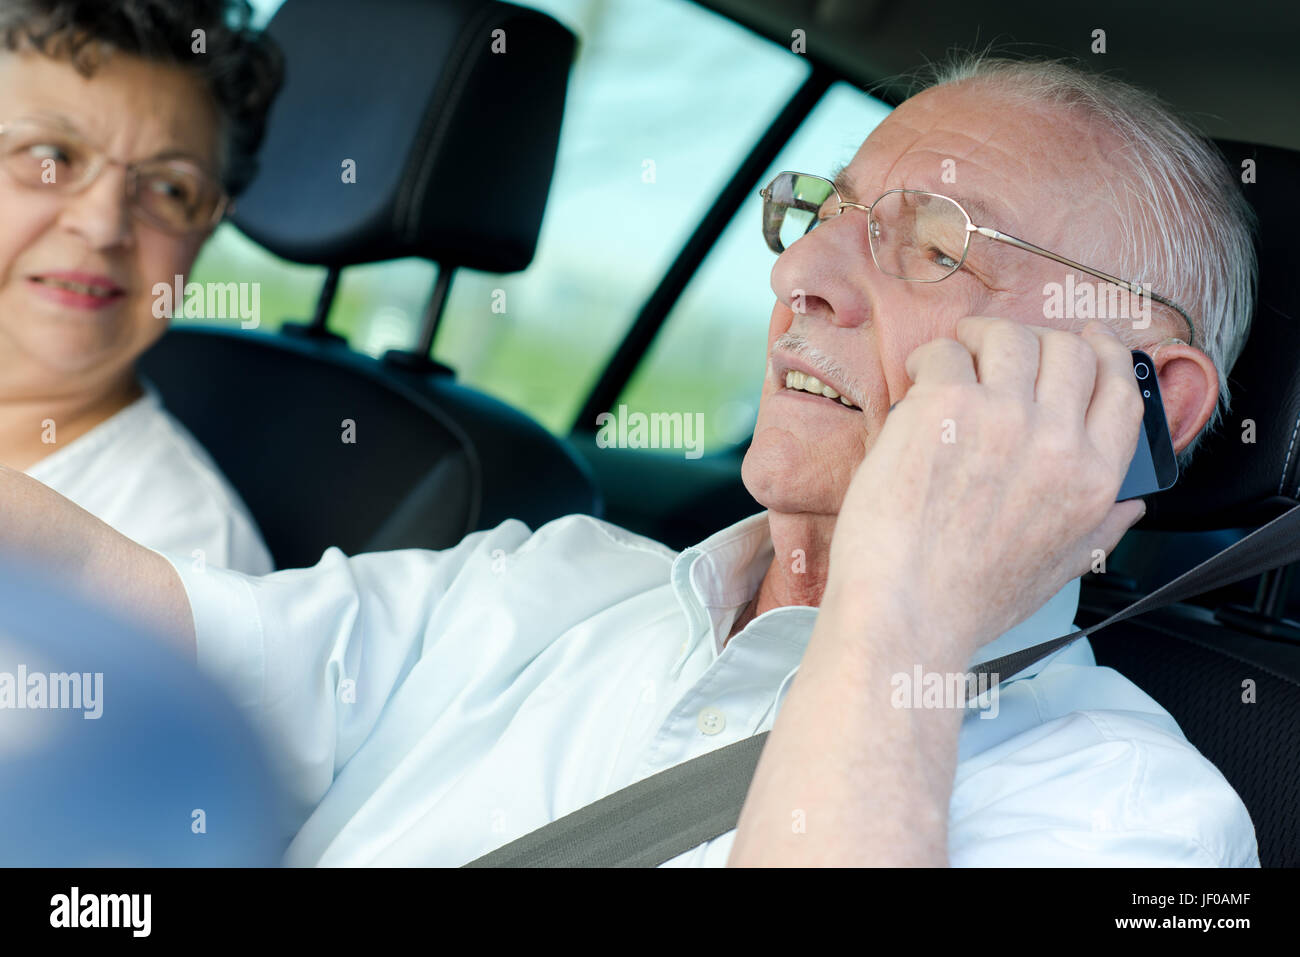 Elderly man on telephone while driving Stock Photo